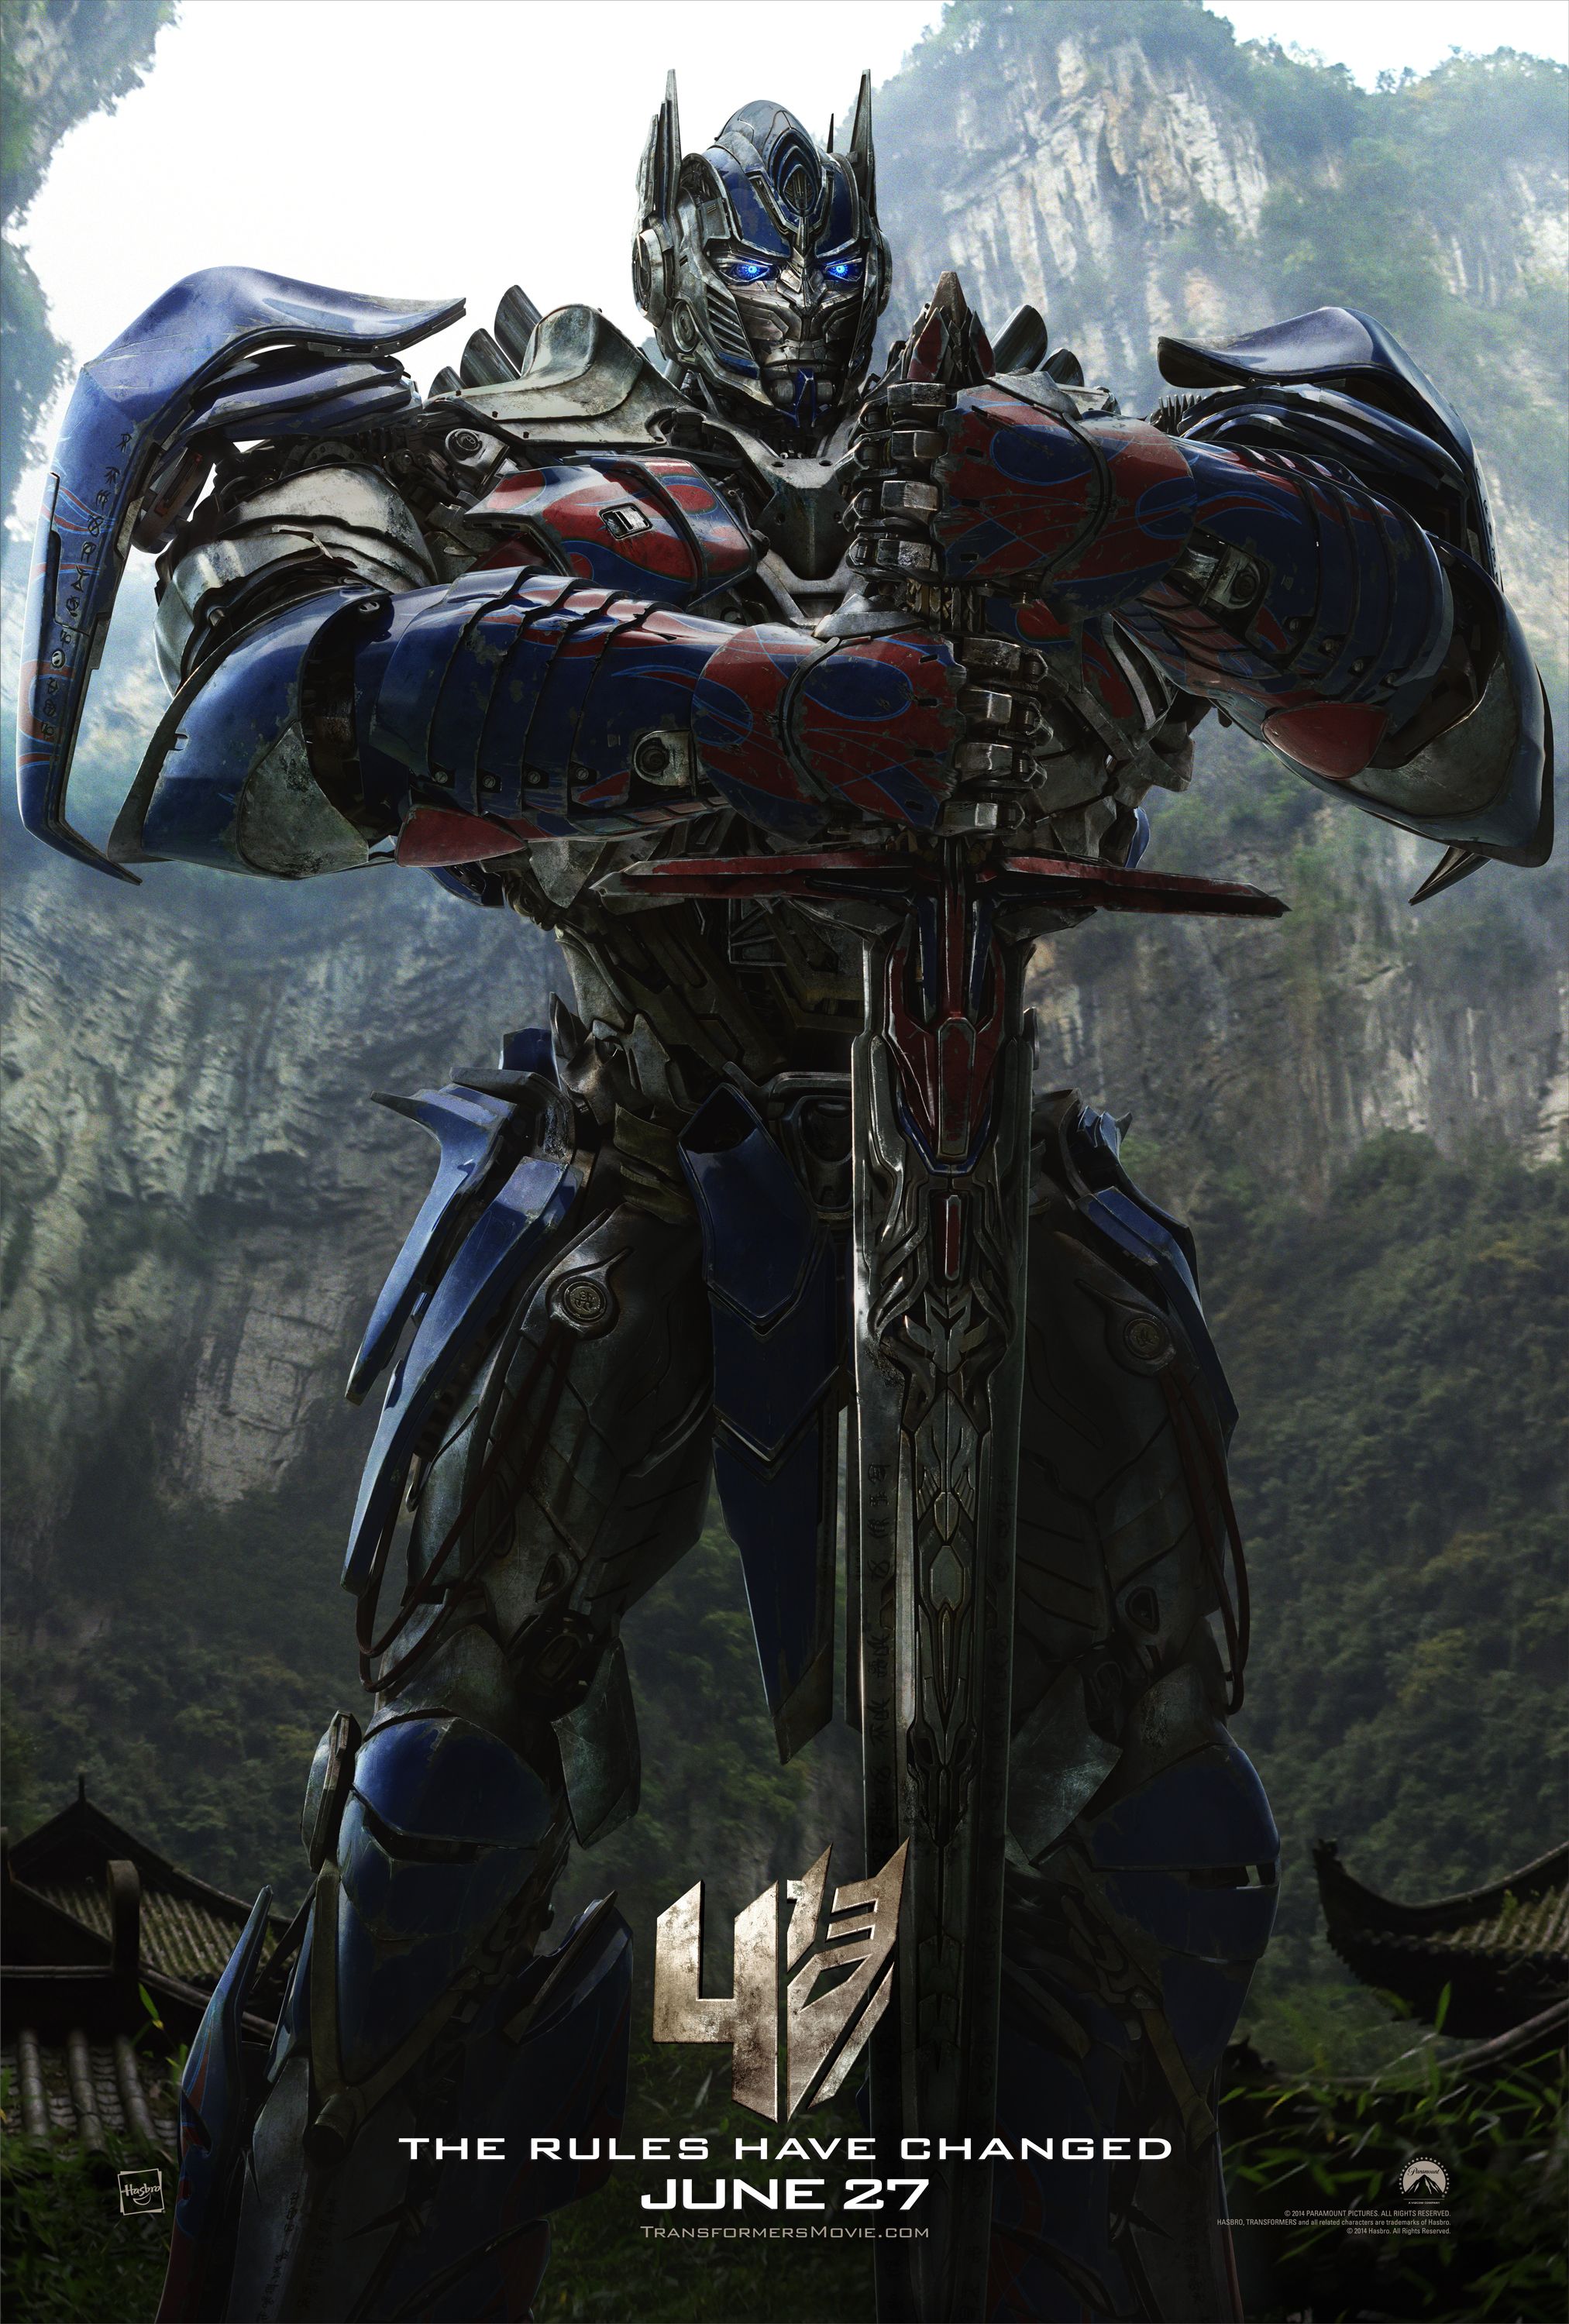 Meet the new Optimus Prime in Transformers 4